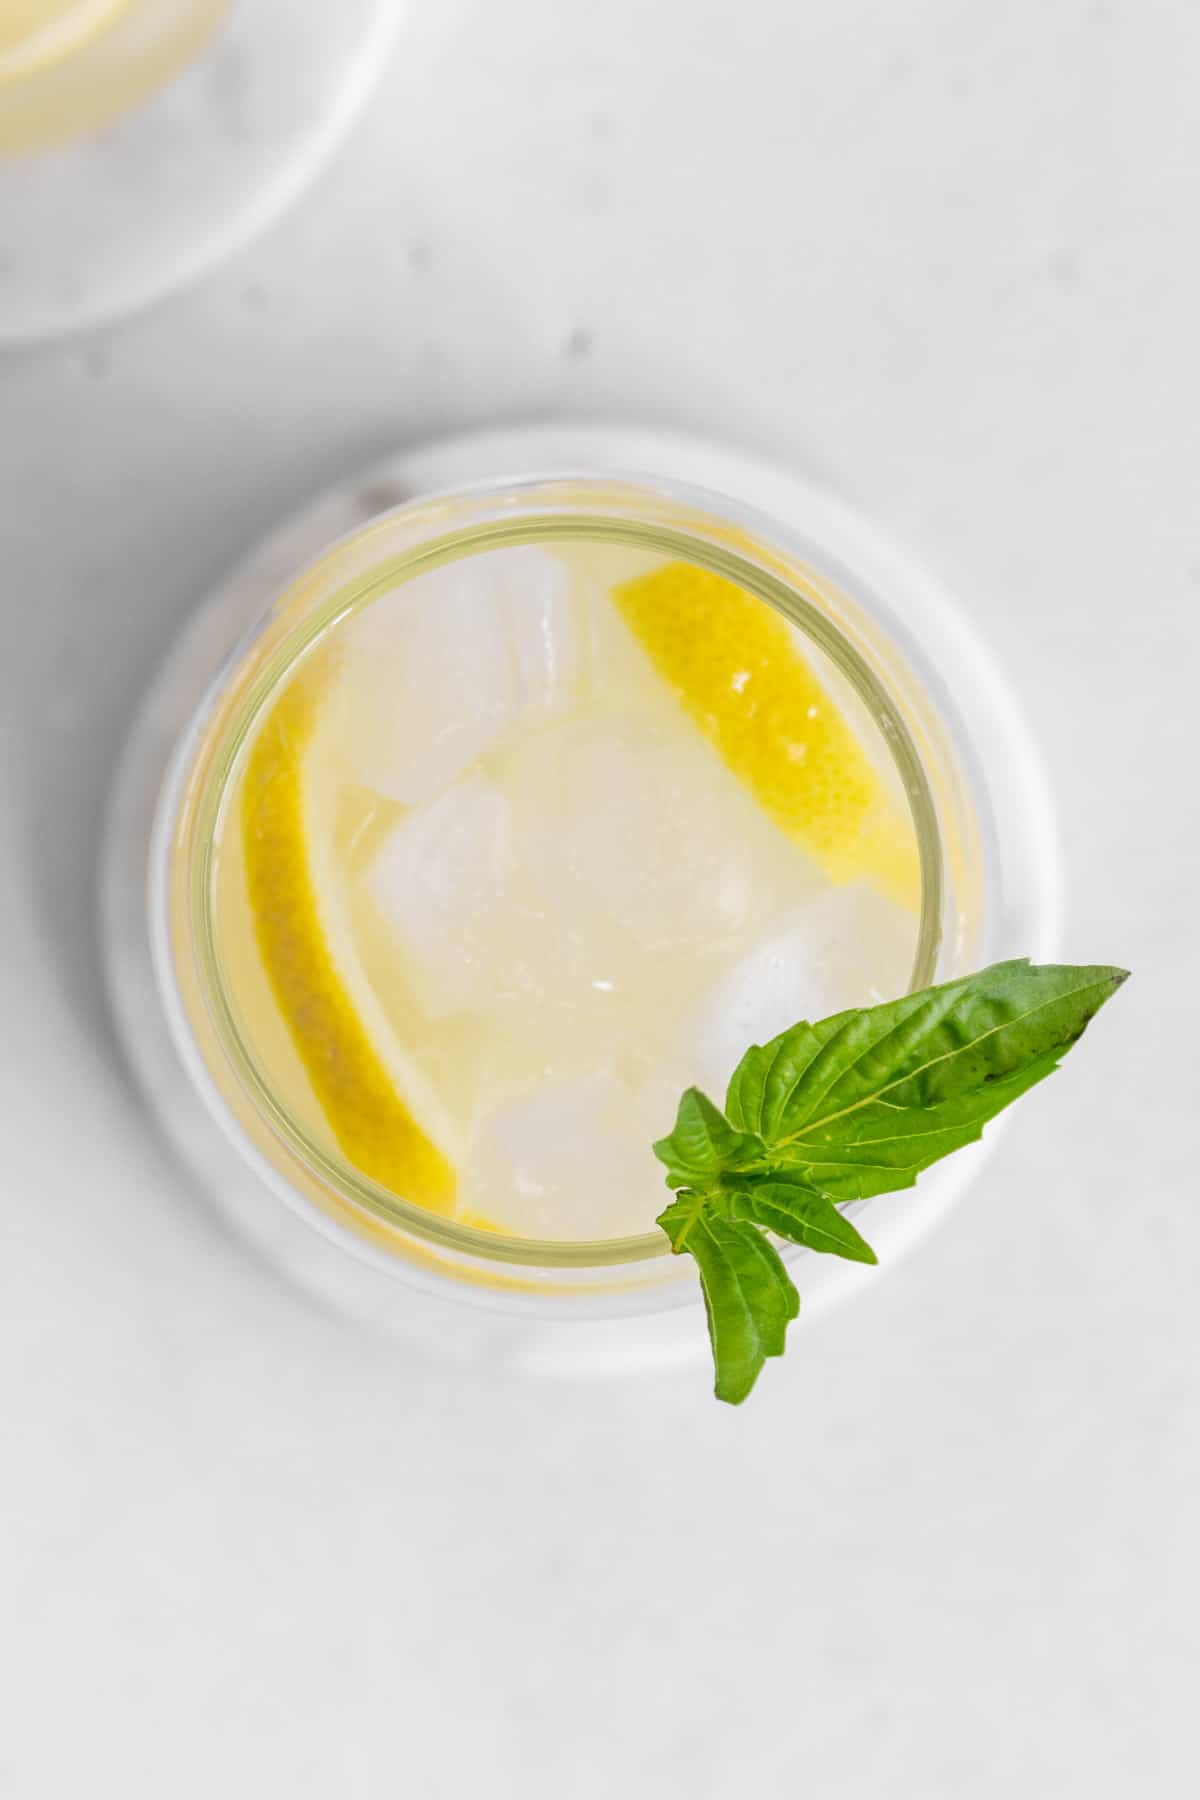 Overhead view of a glass of basil lemonade with ice and basil garnish on top.